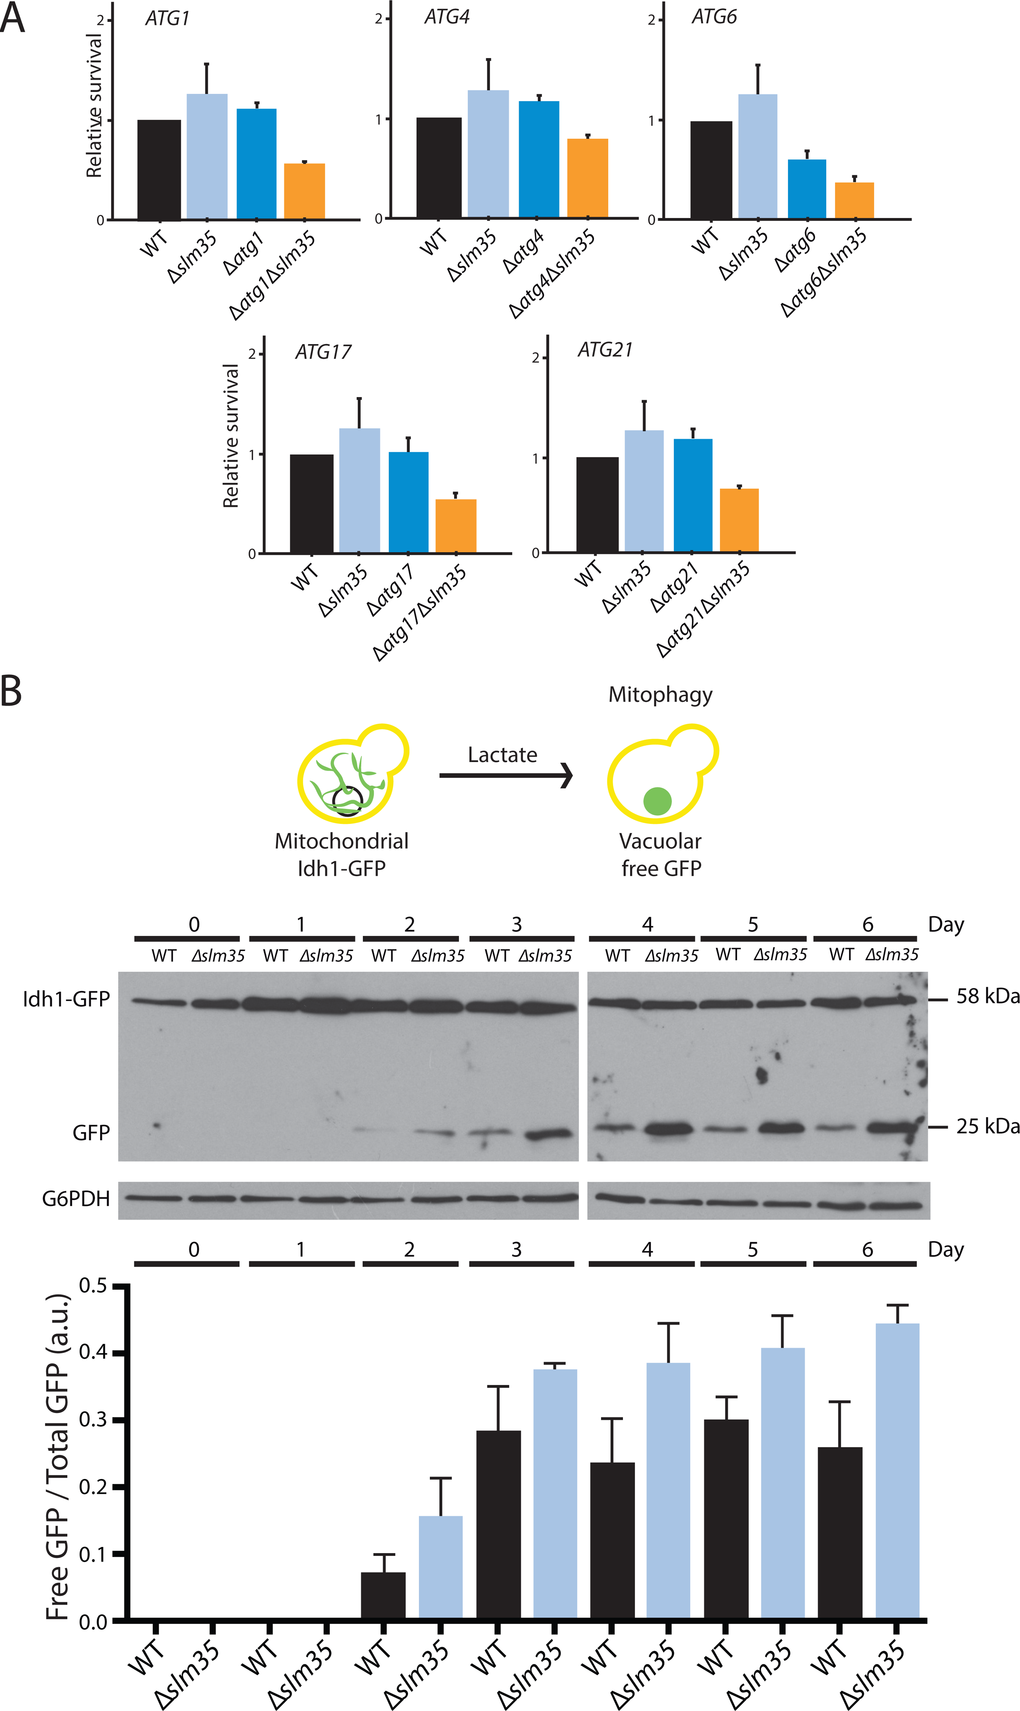 The function of Slm35 is necessary for the regulation of general and mitochondrial selective autophagy. (A) Relative survival under heat shock conditions of wild-type (WT), single mutants Δslm35, Δatg1, Δatg4, Δatg6, Δatg17, and Δatg21, or double mutants Δatg1Δslm35, Δatg4Δslm35, Δatg6Δslm35, Δatg17Δslm35, and Δatg21Δslm35. Cells were grown on SCD liquid medium during three days before applying a thermal shock of 20 min at 55 oC. Aliquots were taken immediately after the stress to construct YPD growth curves to calculate the relative survival. (B) Overnight YPD cultures of wild-type or Δslm35 cells harboring the fusion protein Idh1-GFP were shifted to YPL medium to an OD600=0.1 to induce mitophagy. Every 24 hours an aliquot of the culture was taken and whole cell extracts were analyzed by Western blot. Mitochondrial Idh1-GFP runs as a discrete band at around 60 kDa, vacuolar free GFP runs at 25 kDa. G6PDH was used as loading control. Signals from three independent experiments were quantified by densitometry.